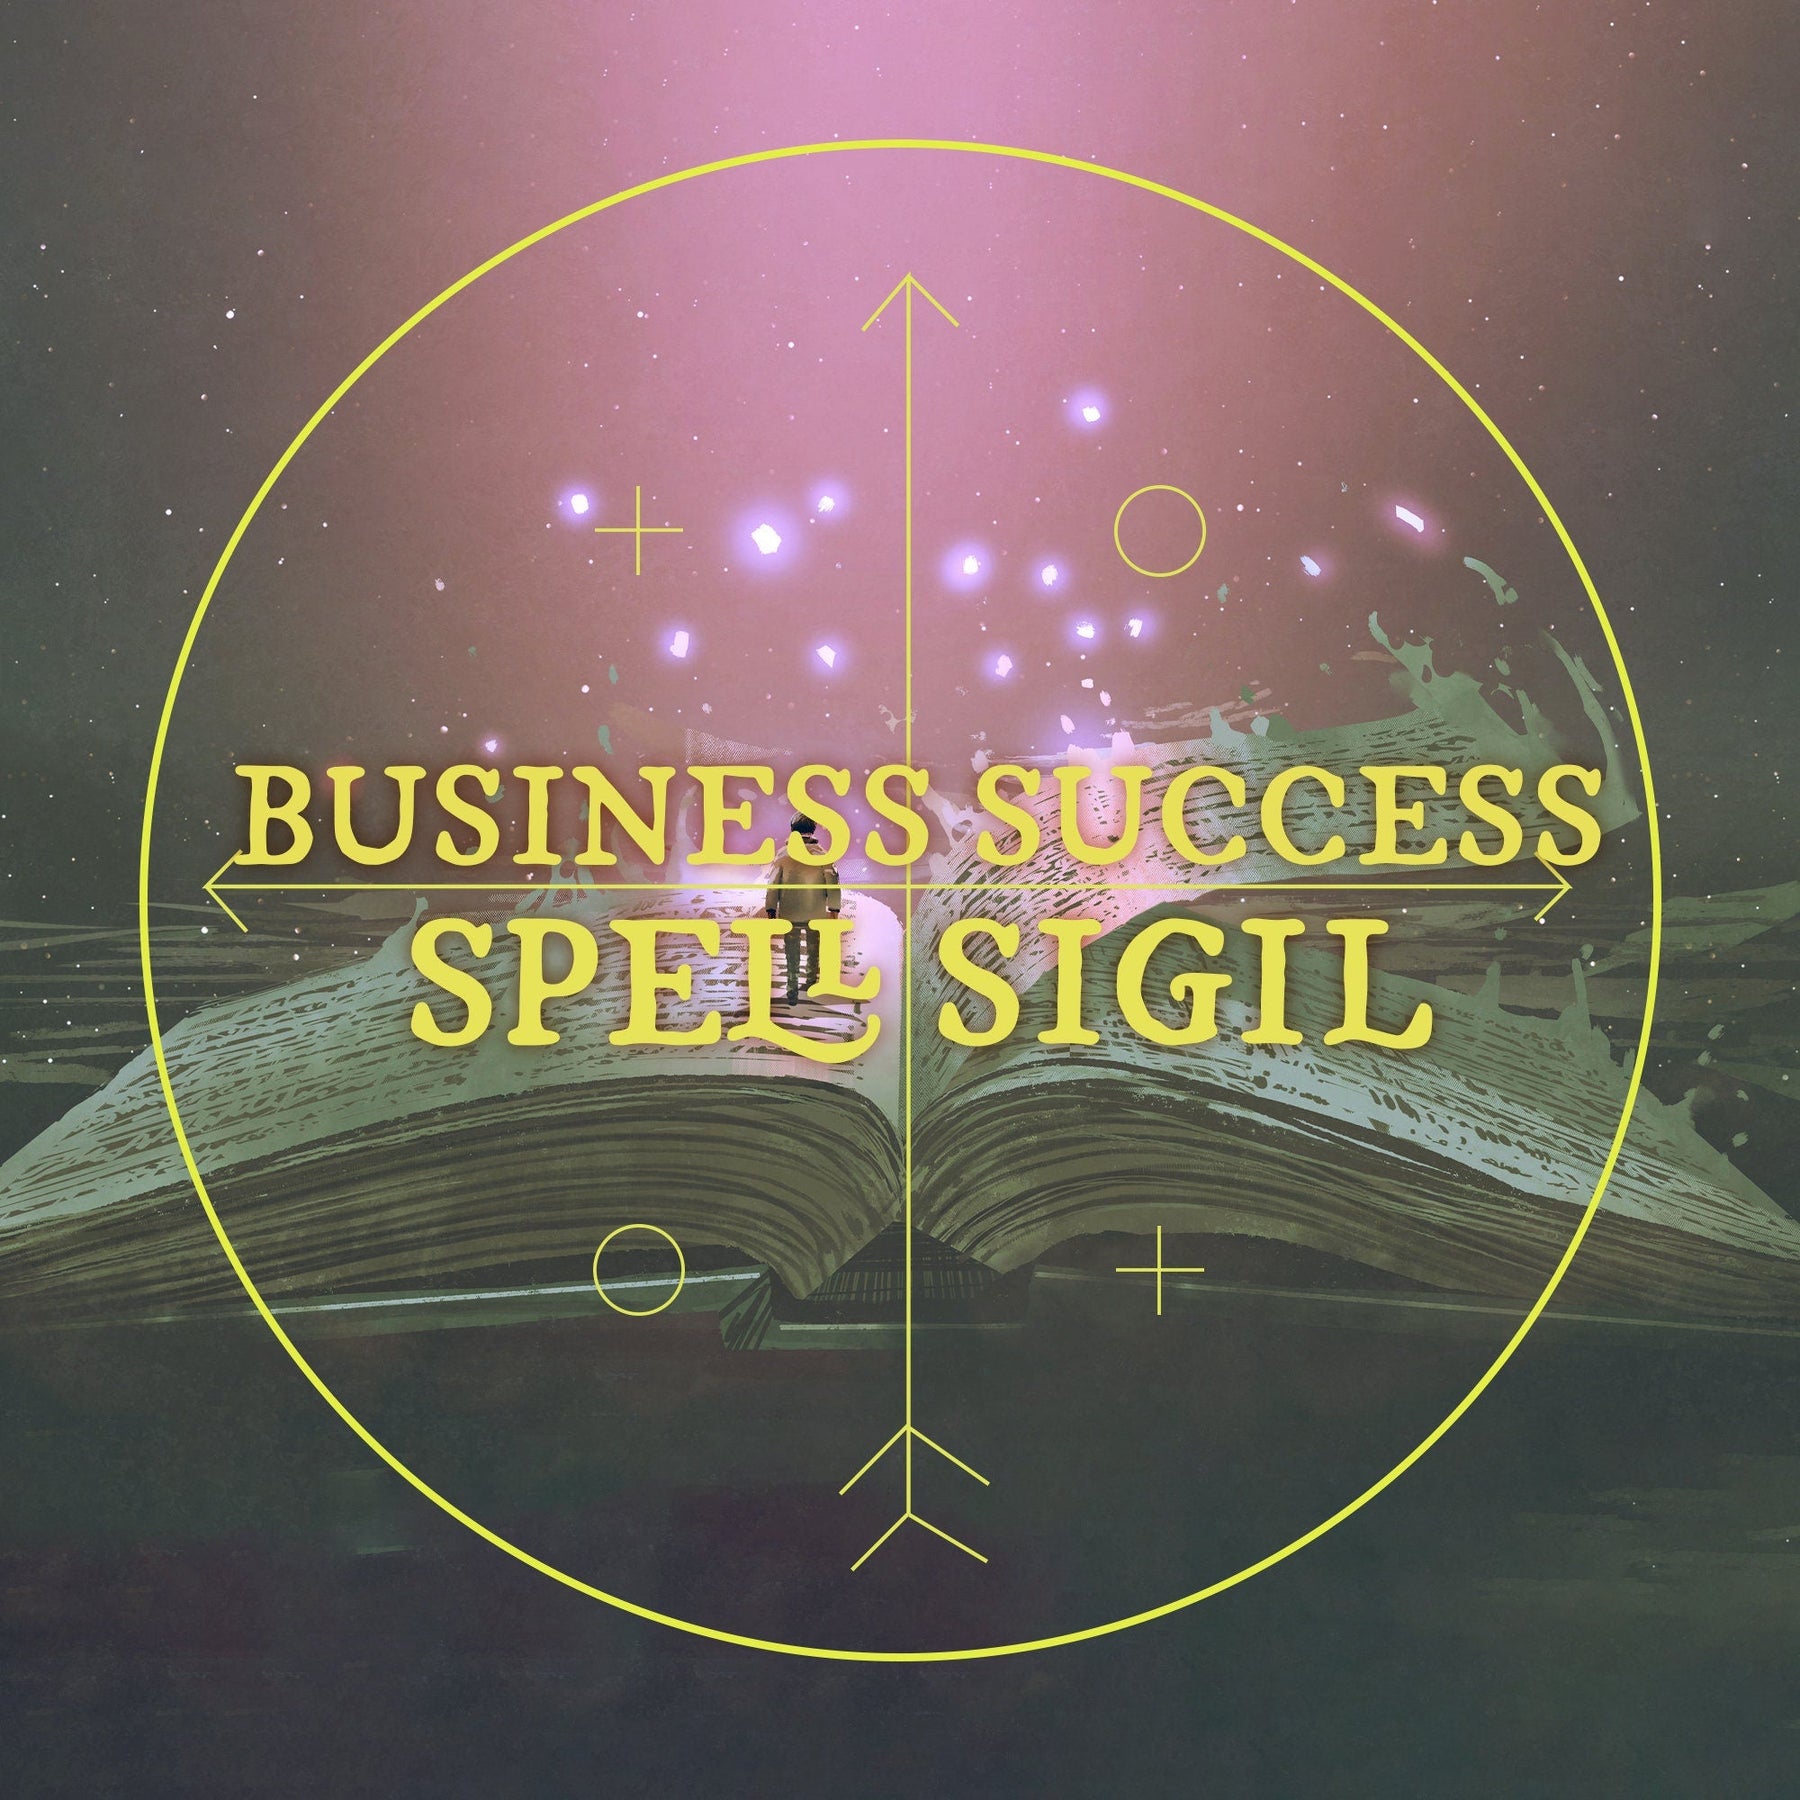 Business Success Spell Sigil Digital Attract Success In Business